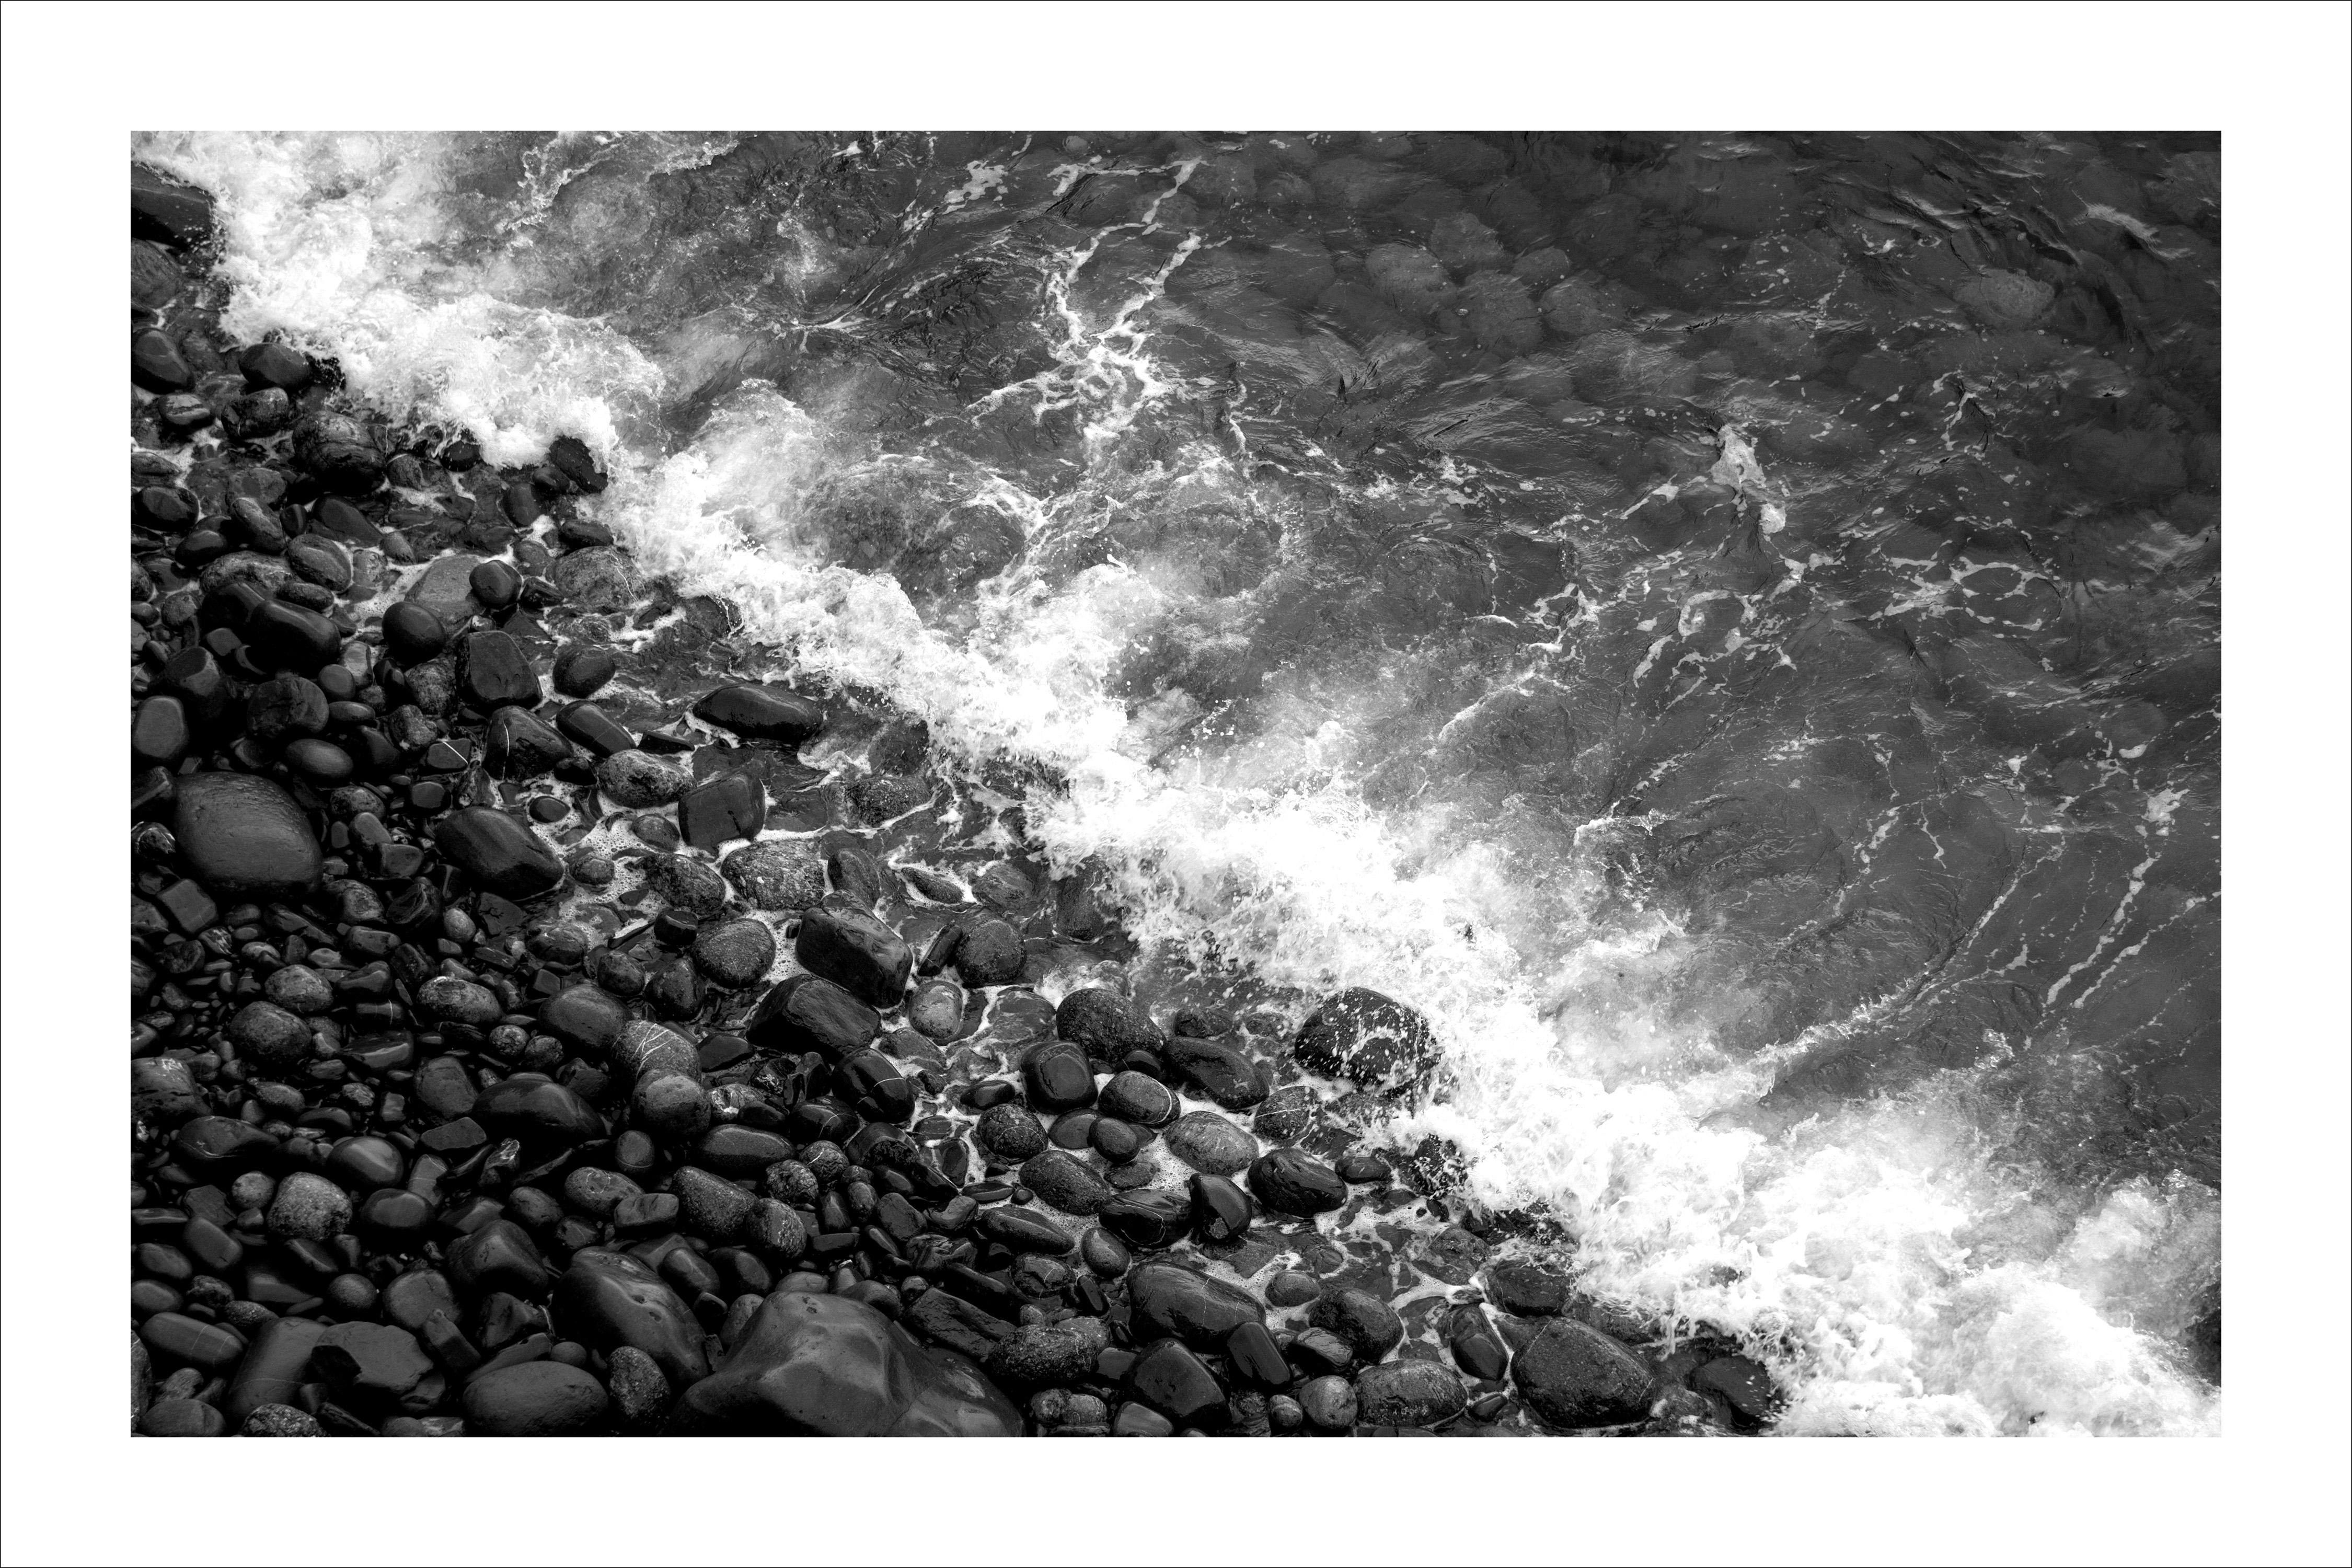 Extra Large Limited Edition Giclée Print of British Pebble Beach, Black & White